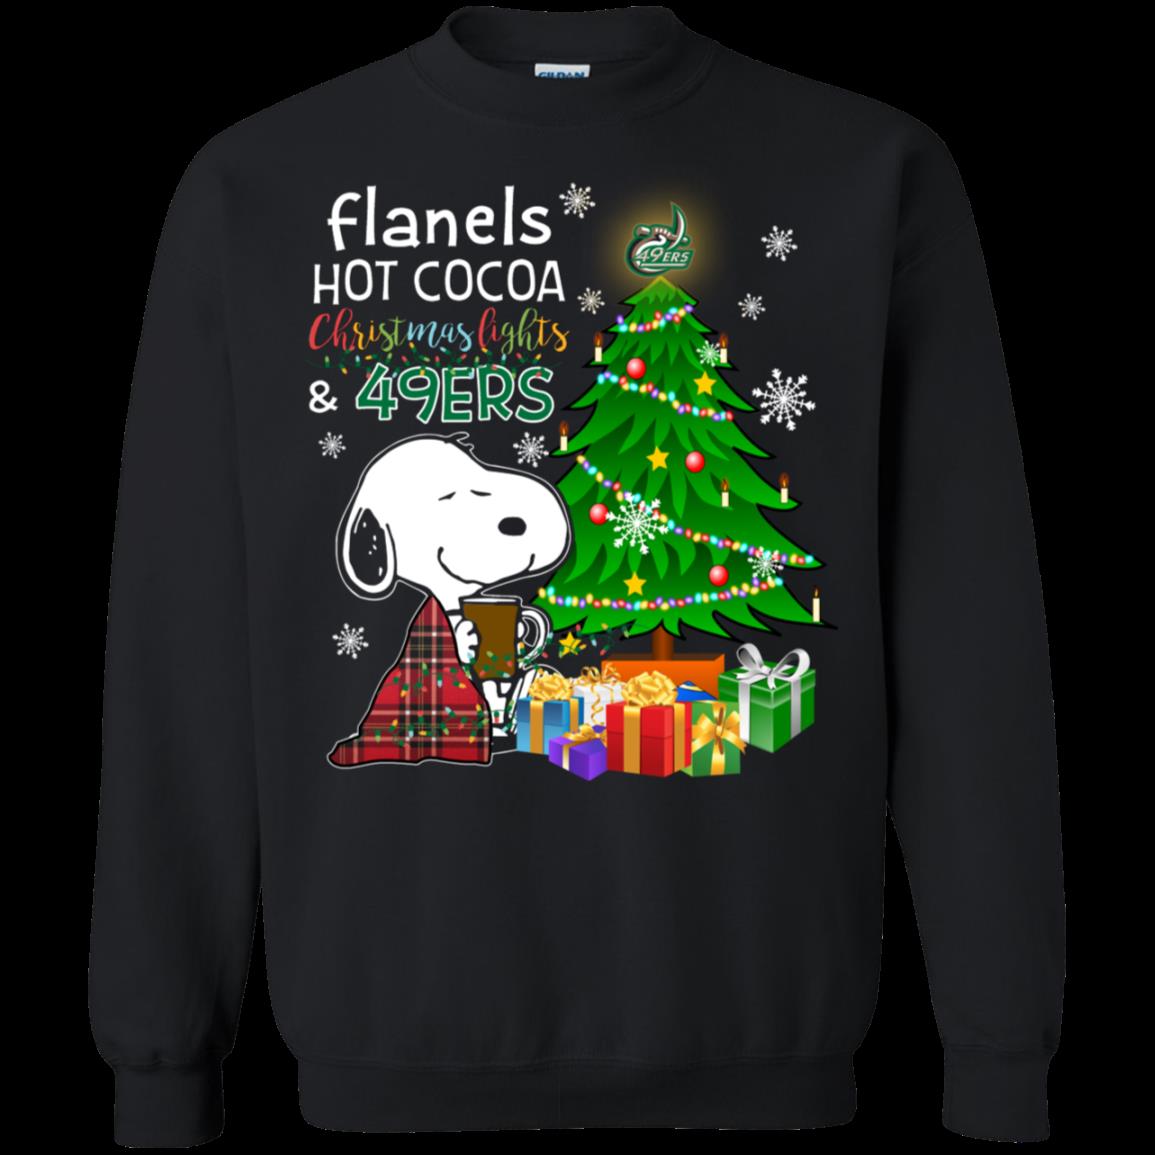 Charlotte 49ers Snoopy Ugly Christmas Sweater Flanels Hot Cocoa